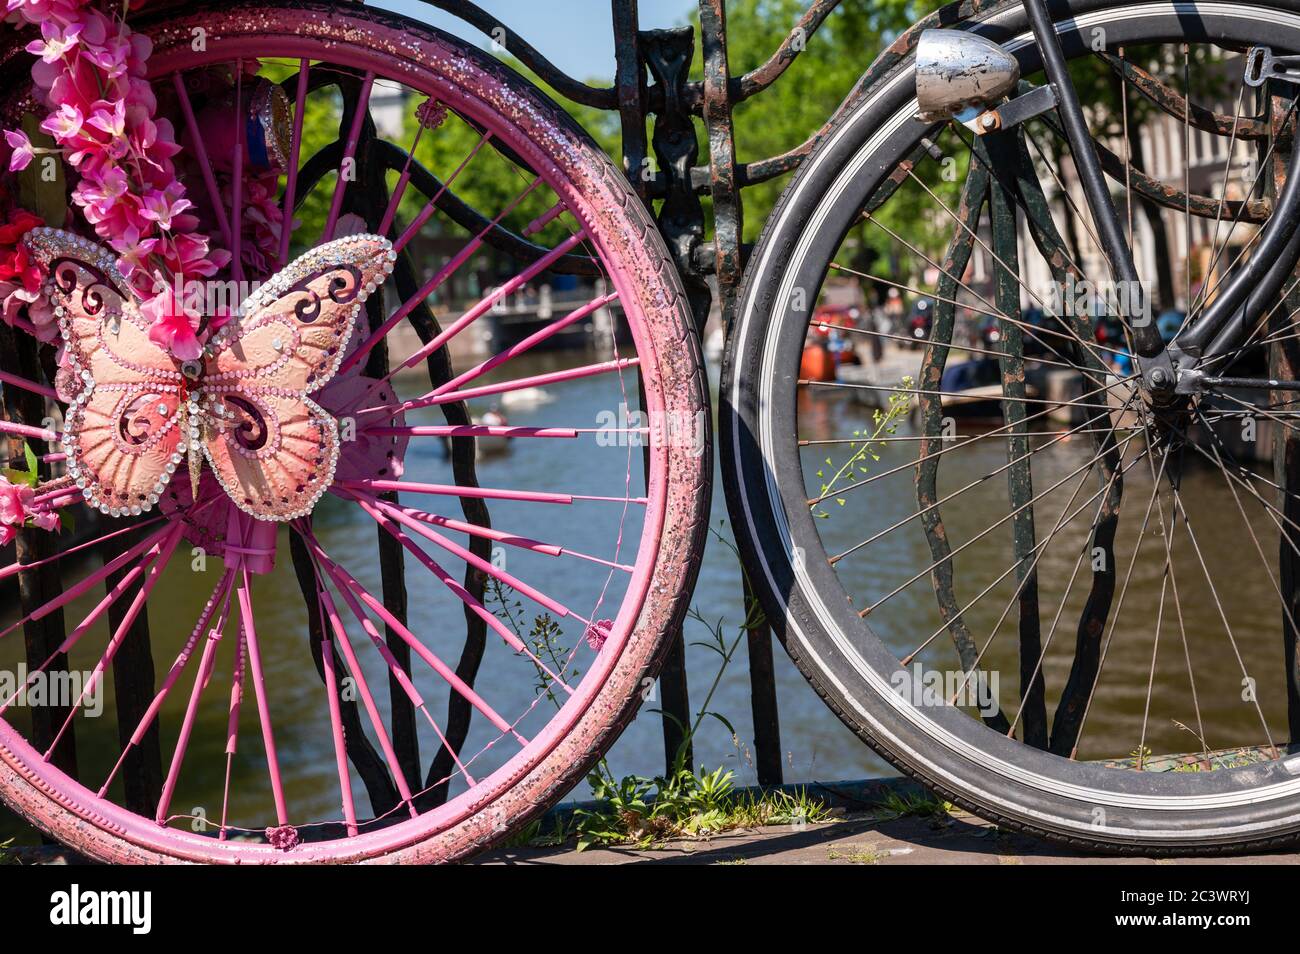 Wheels of decorated pink bicycle parked on a bridge over a canal in Amsterdam, Netherlands Stock Photo